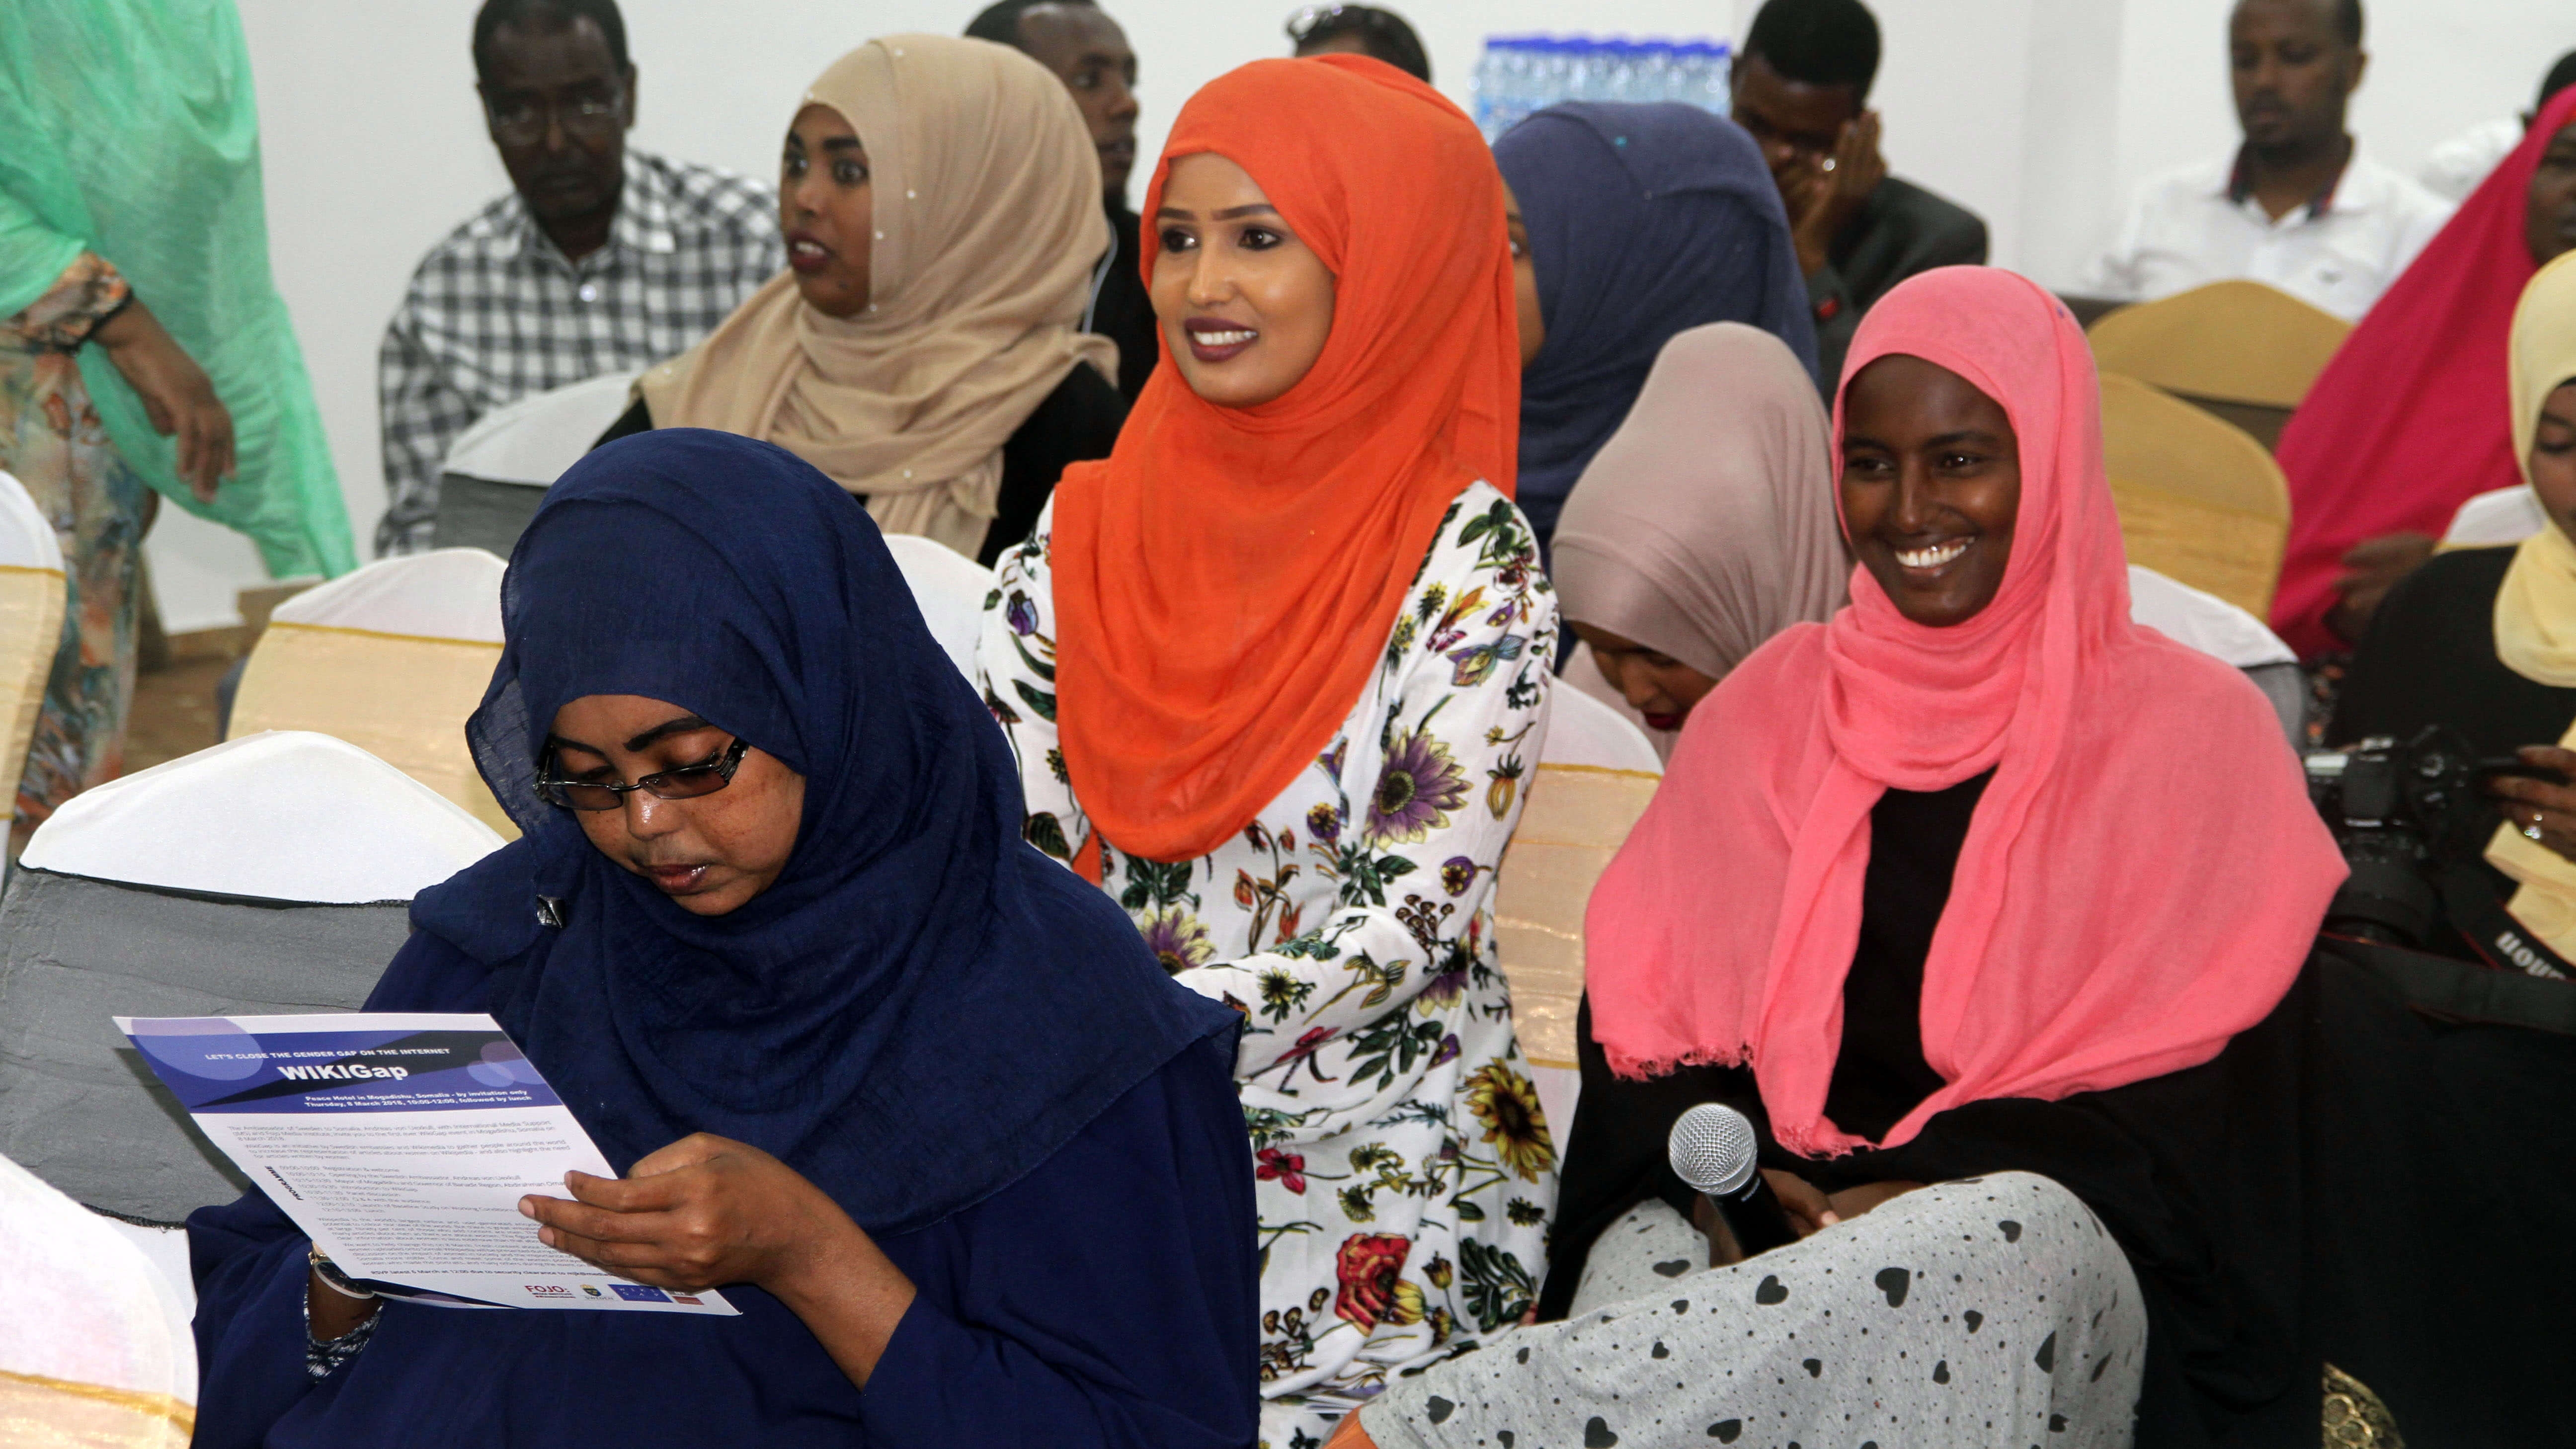 The road to equal rights for female journalists in Somalia